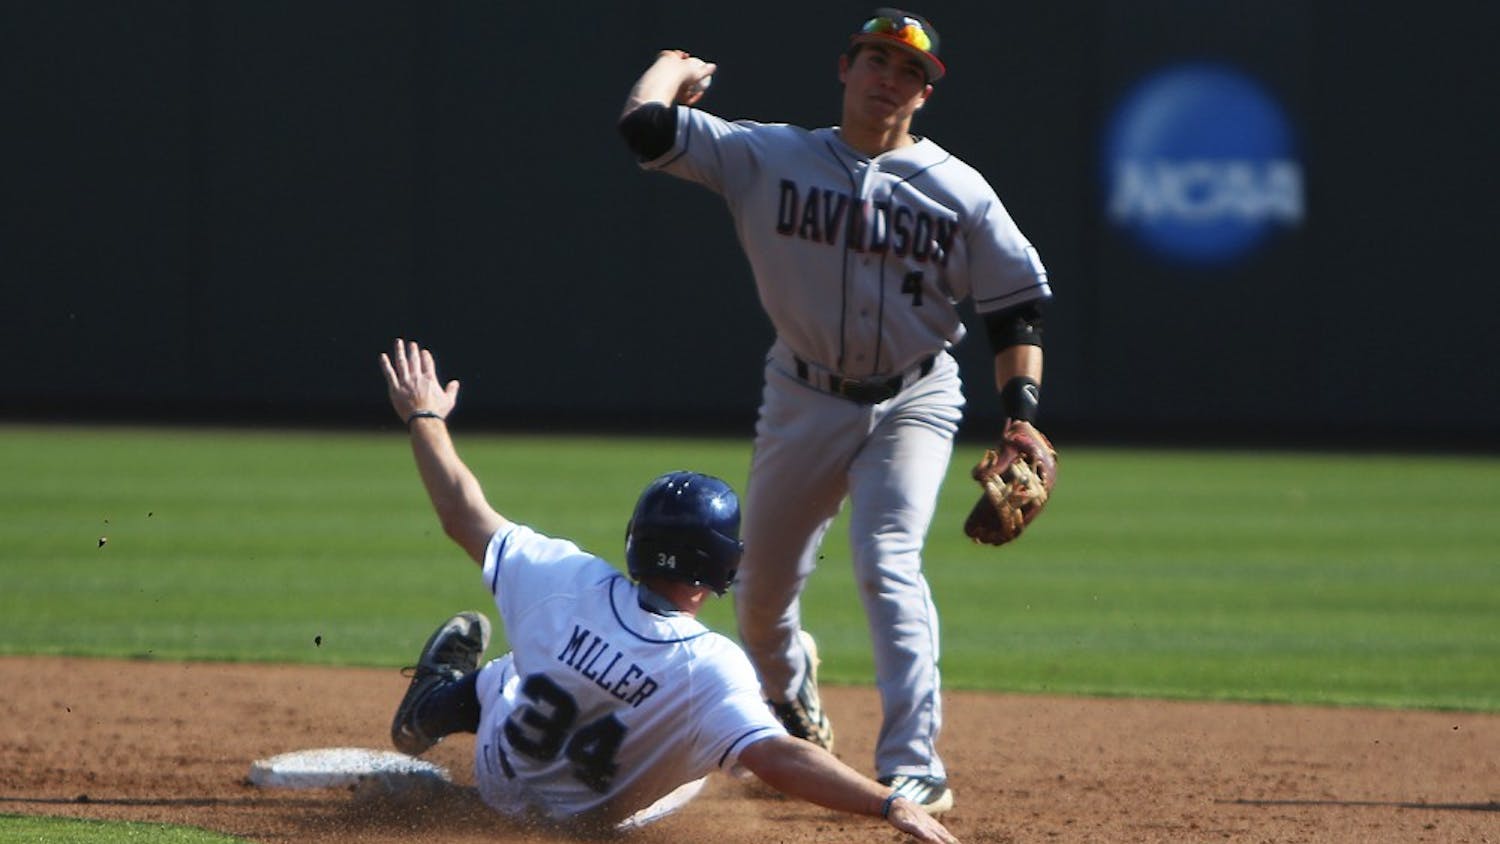 Left fielder Brian Miller (34) slides into second base where he is tagged out.